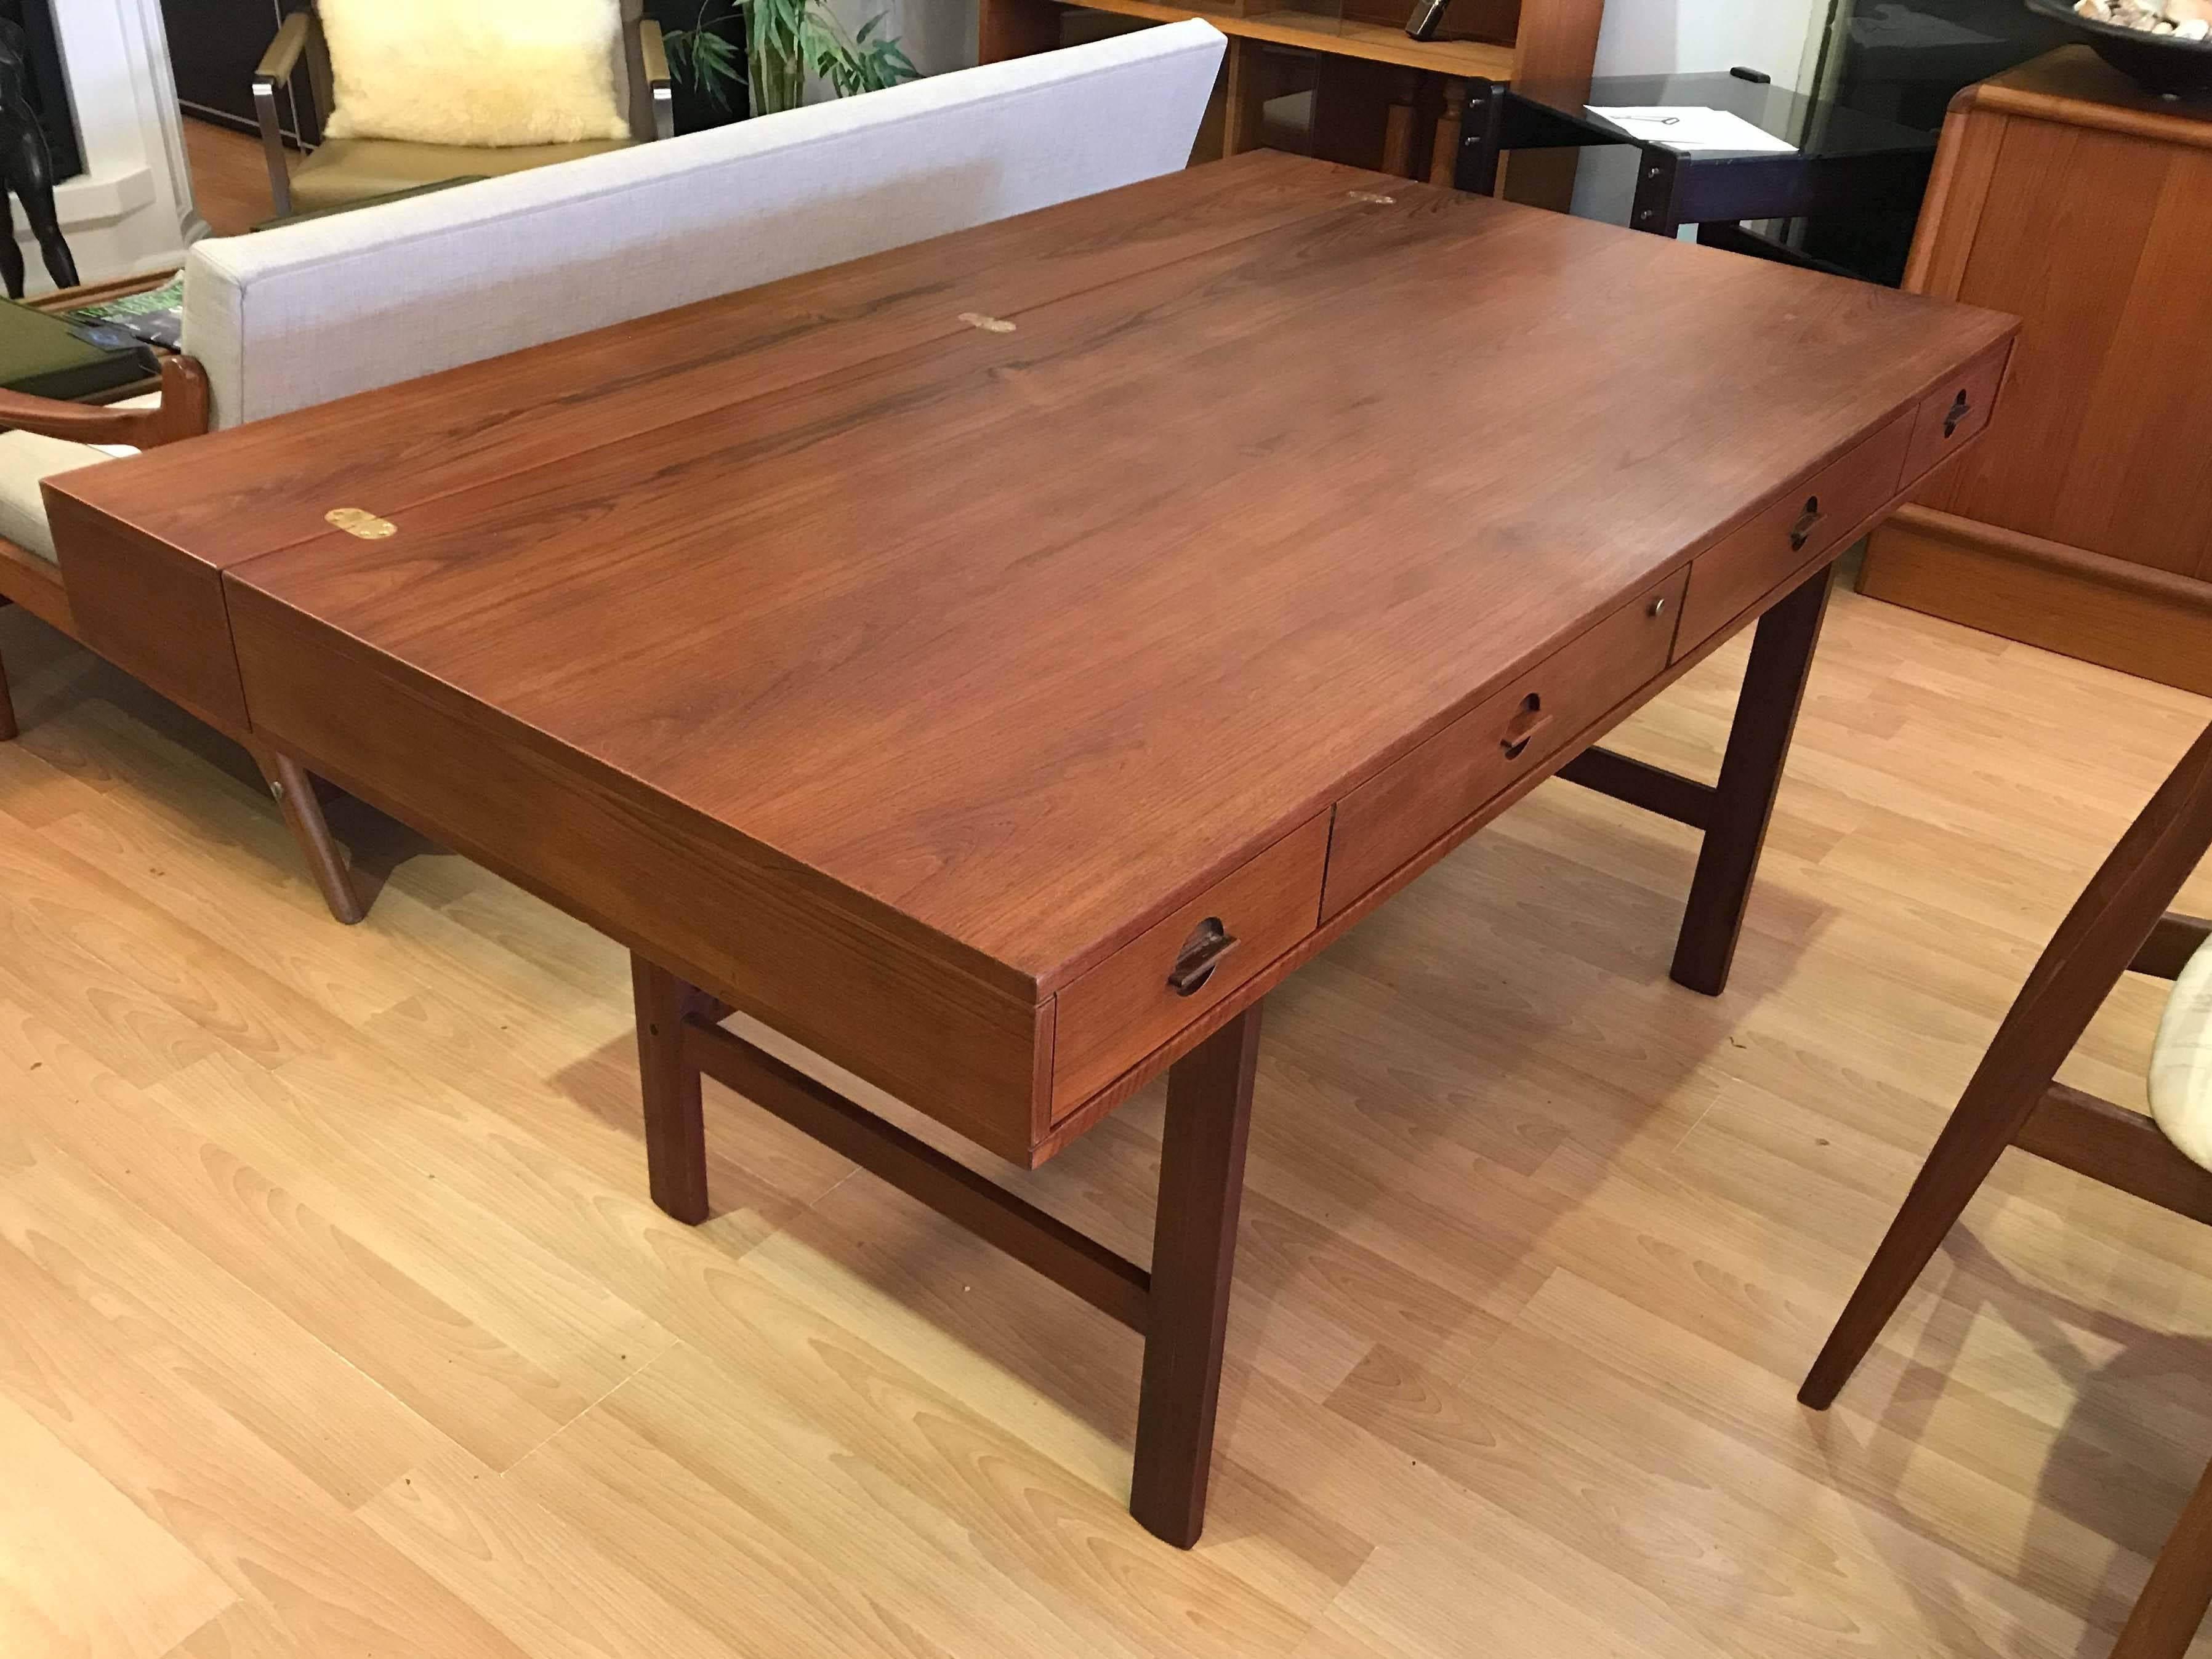 Danish teak flip-top partners desk by Peter Løvig Nielsen. The top has a variety of segmented compartments. The upper section is hinged and flips backward to expand the depth from 29